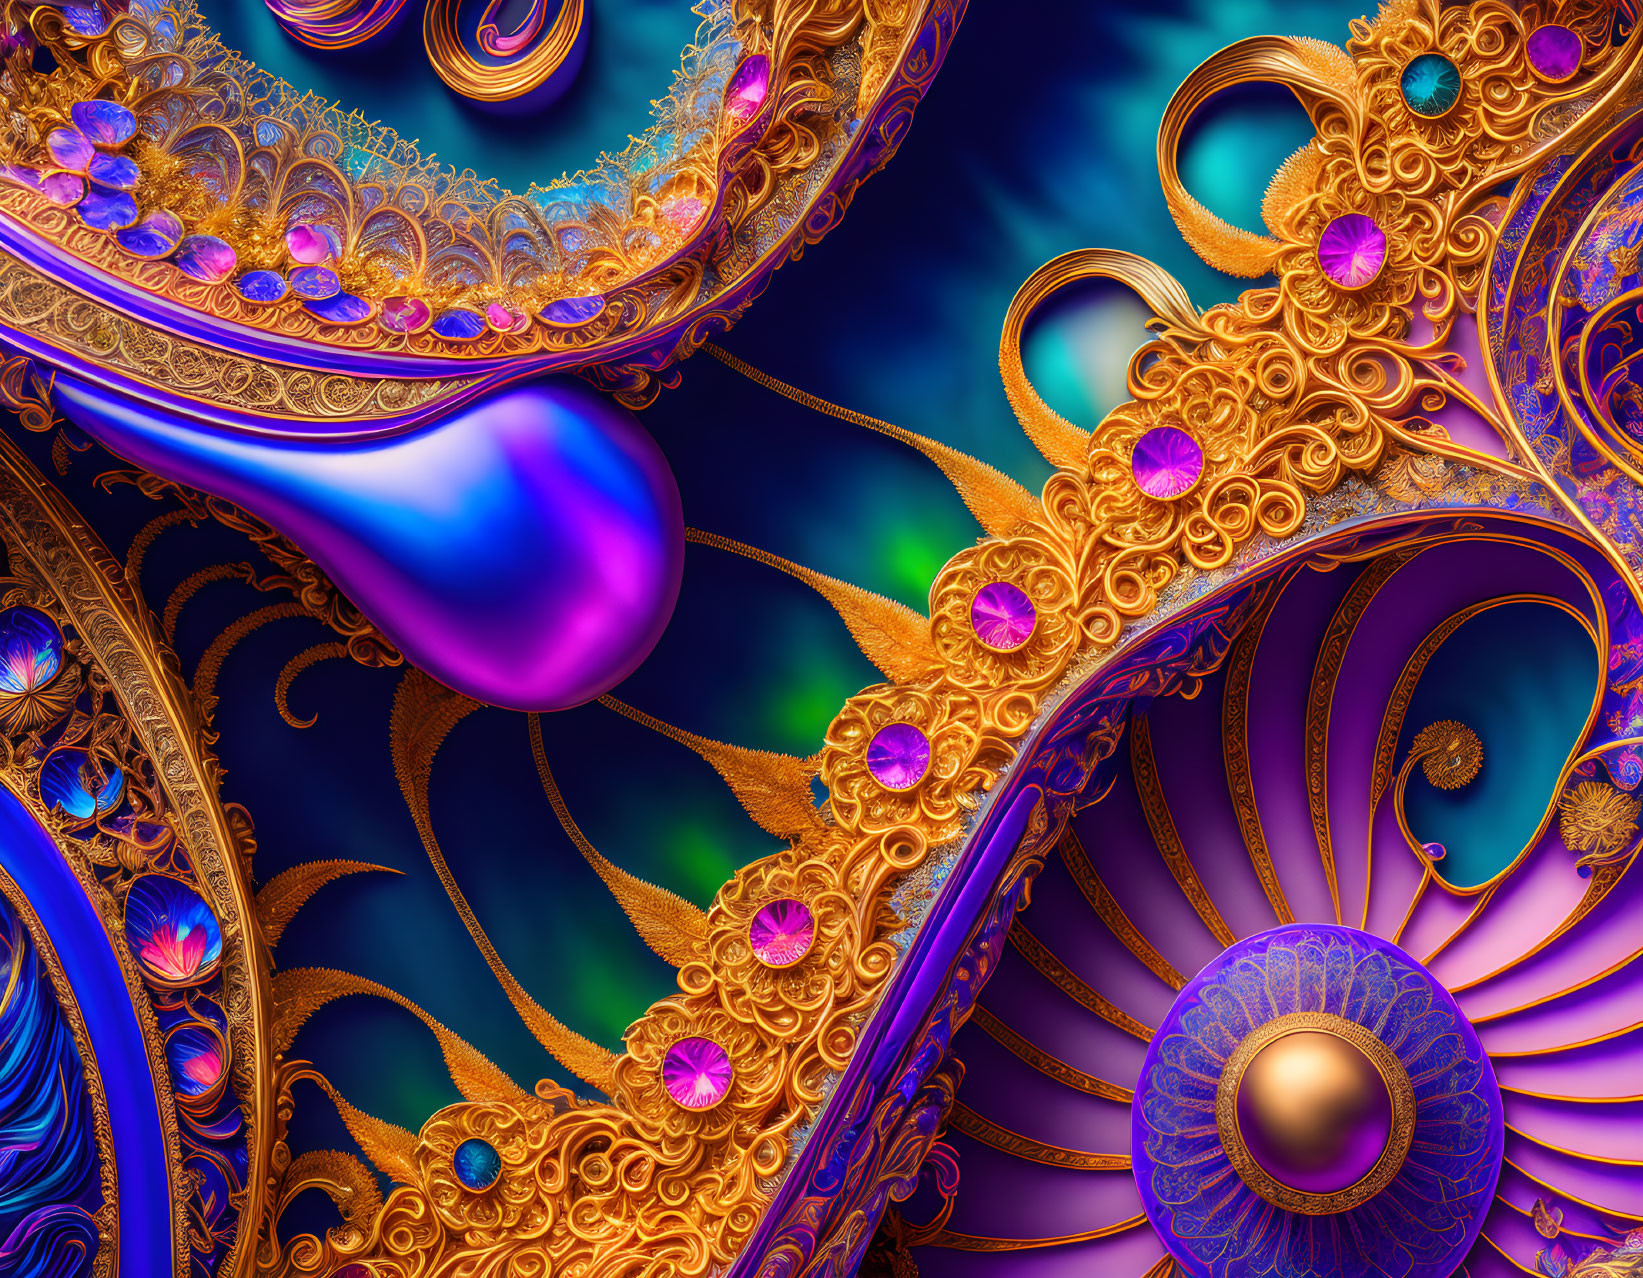 Detailed Fractal Design in Vibrant Blues and Golds